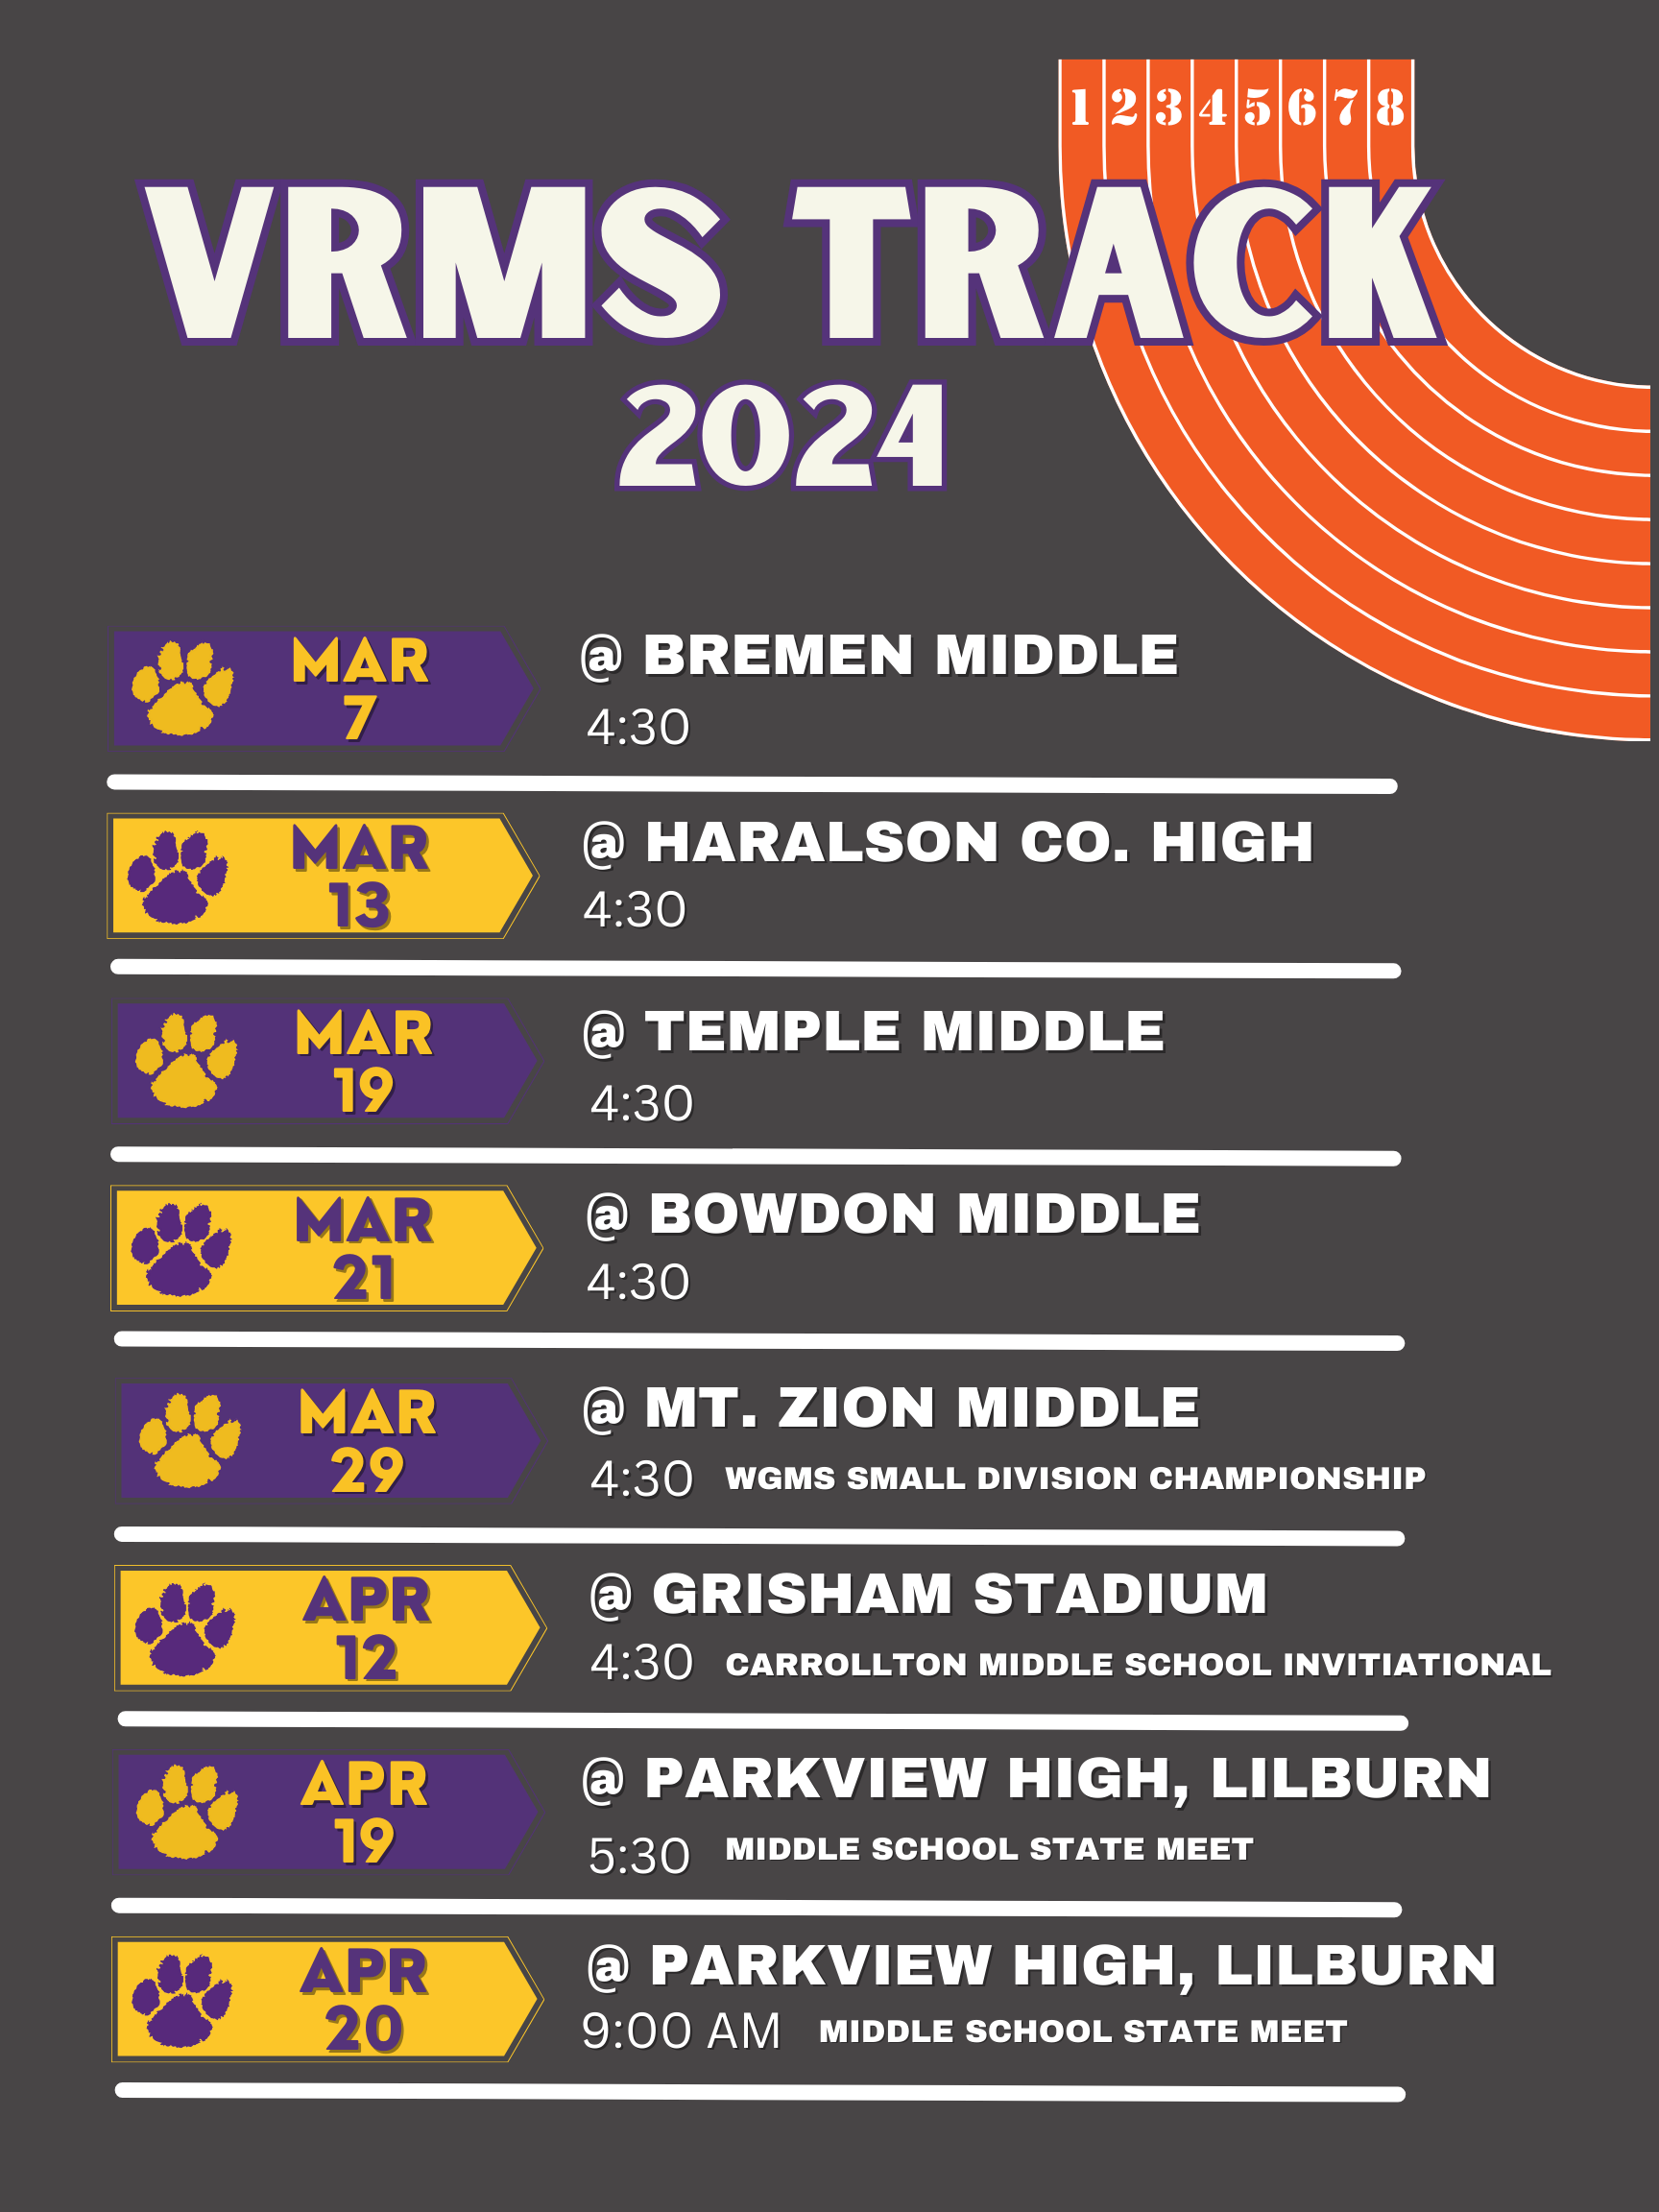 VRMS TRACK 2024 MAR 7 BREMEN MIDDLE 4:30 MAR 13 HARALSON co. HIGH 4:30 MAR 19 TEMPLE MIDDLE 4:30 MAR 21 BOWDON MIDDLE 4:30 MAR 29 @ MT. ZION MIDDLE 4:30 WGMS SMALL DIVISION CHAMPIONSHIP APR 12 GRISHAM STADIUM 4:30 CARROLLTON MIDDLE SCHOOL INVITIATIONAL APR 19 PARKVIEW HIGH, LILBURN 5:30 MIDDLE SCHOOL STATE MEET APR 20 PARKVIEW HIGH, LILBURN 9:00 AM MIDDLE SCHOOL STATE MEE